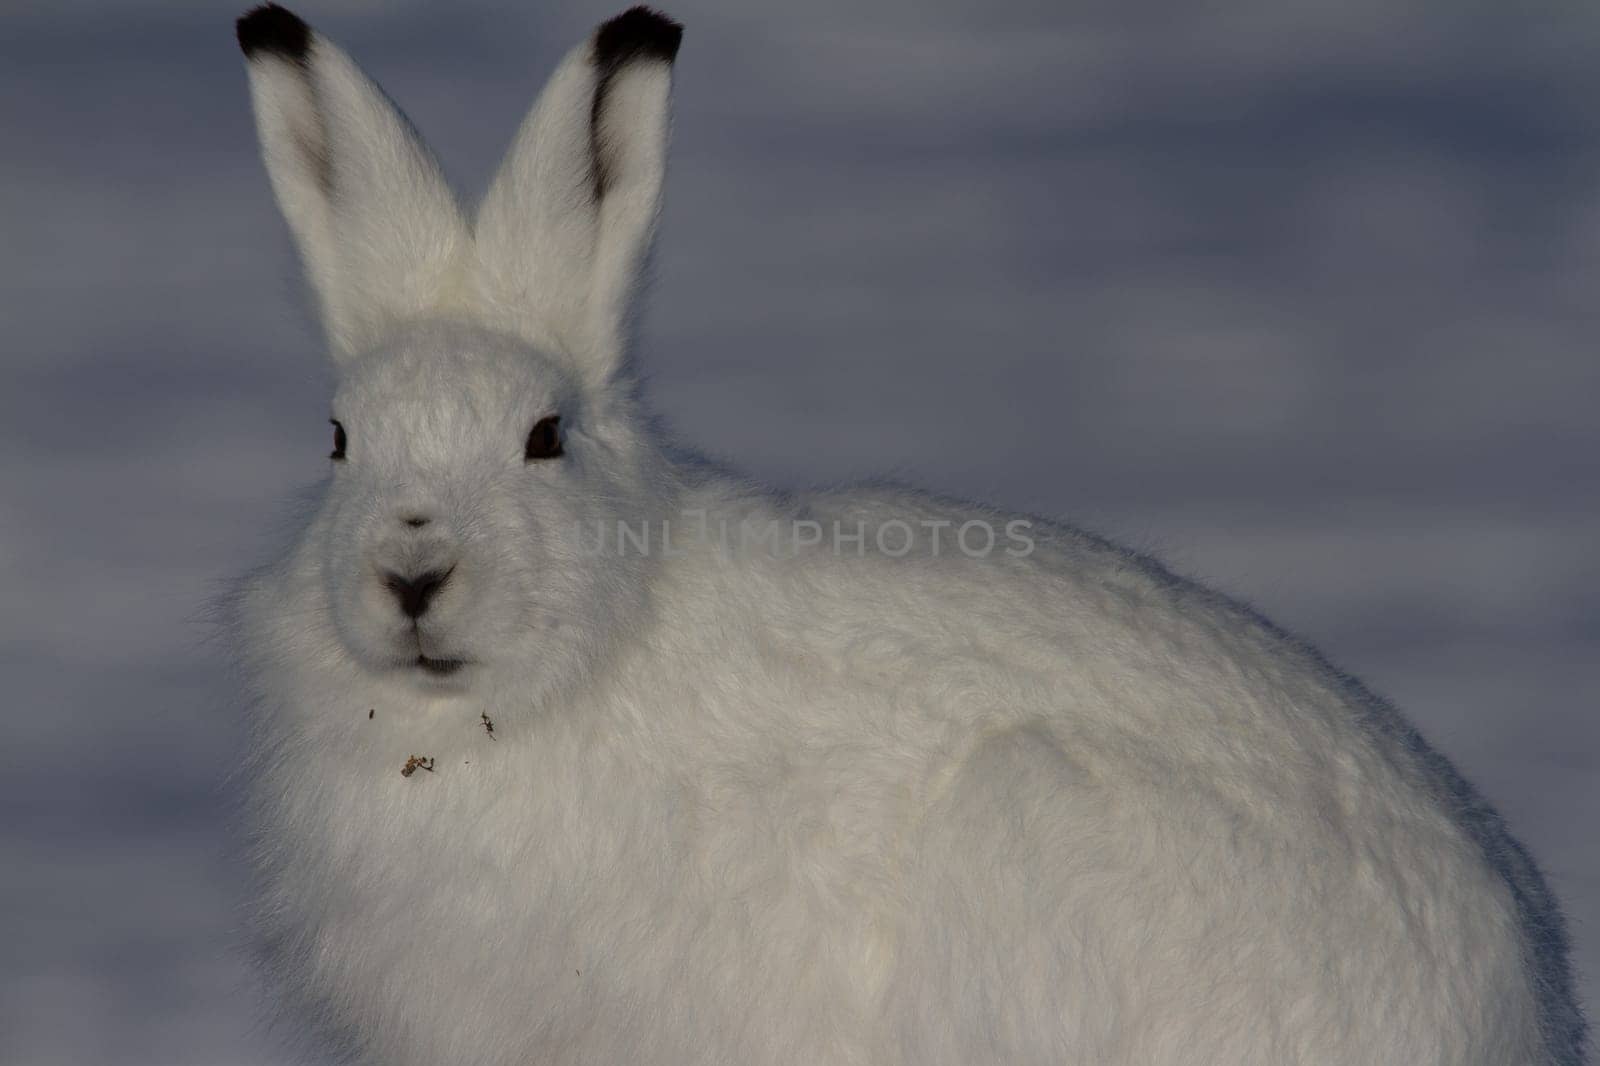 Arctic hare or Lepus arcticus in winter coat staring towards the side with snow in the background, near Arviat, Nunavut, Canada